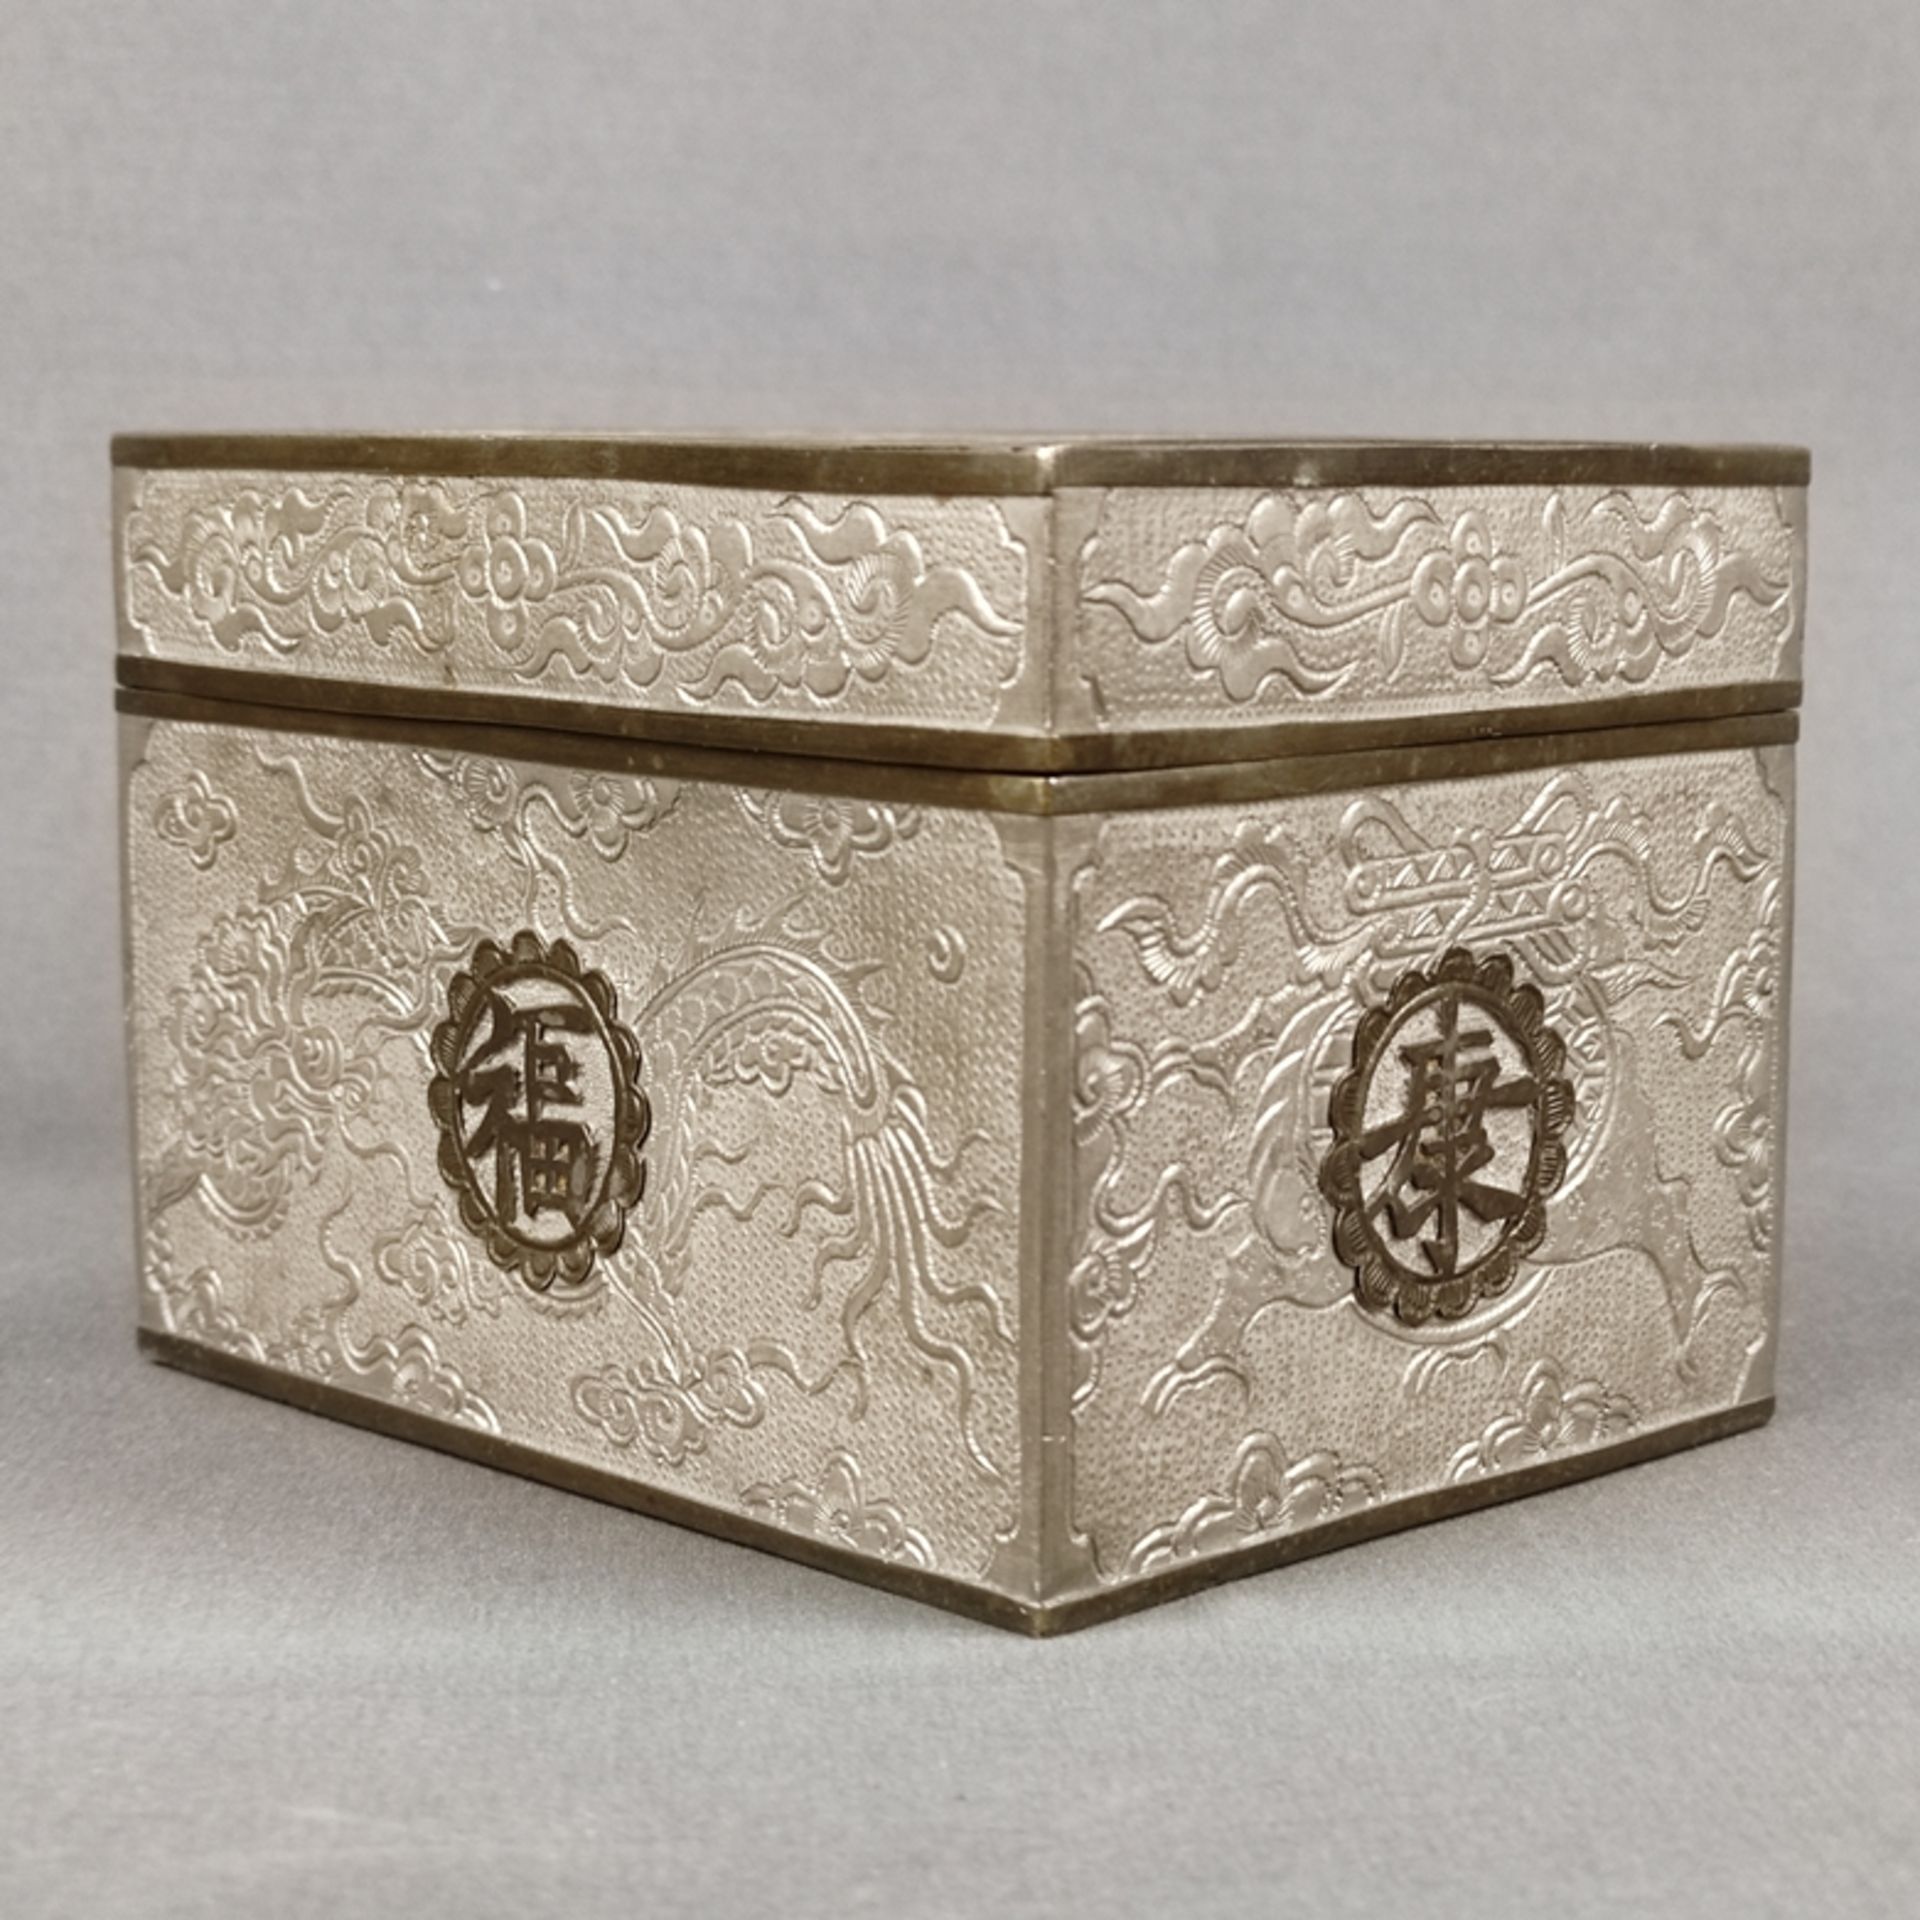 Tea caddy, China, pewter, relief decoration with floral motives and dragons, on each side writing c - Image 4 of 5